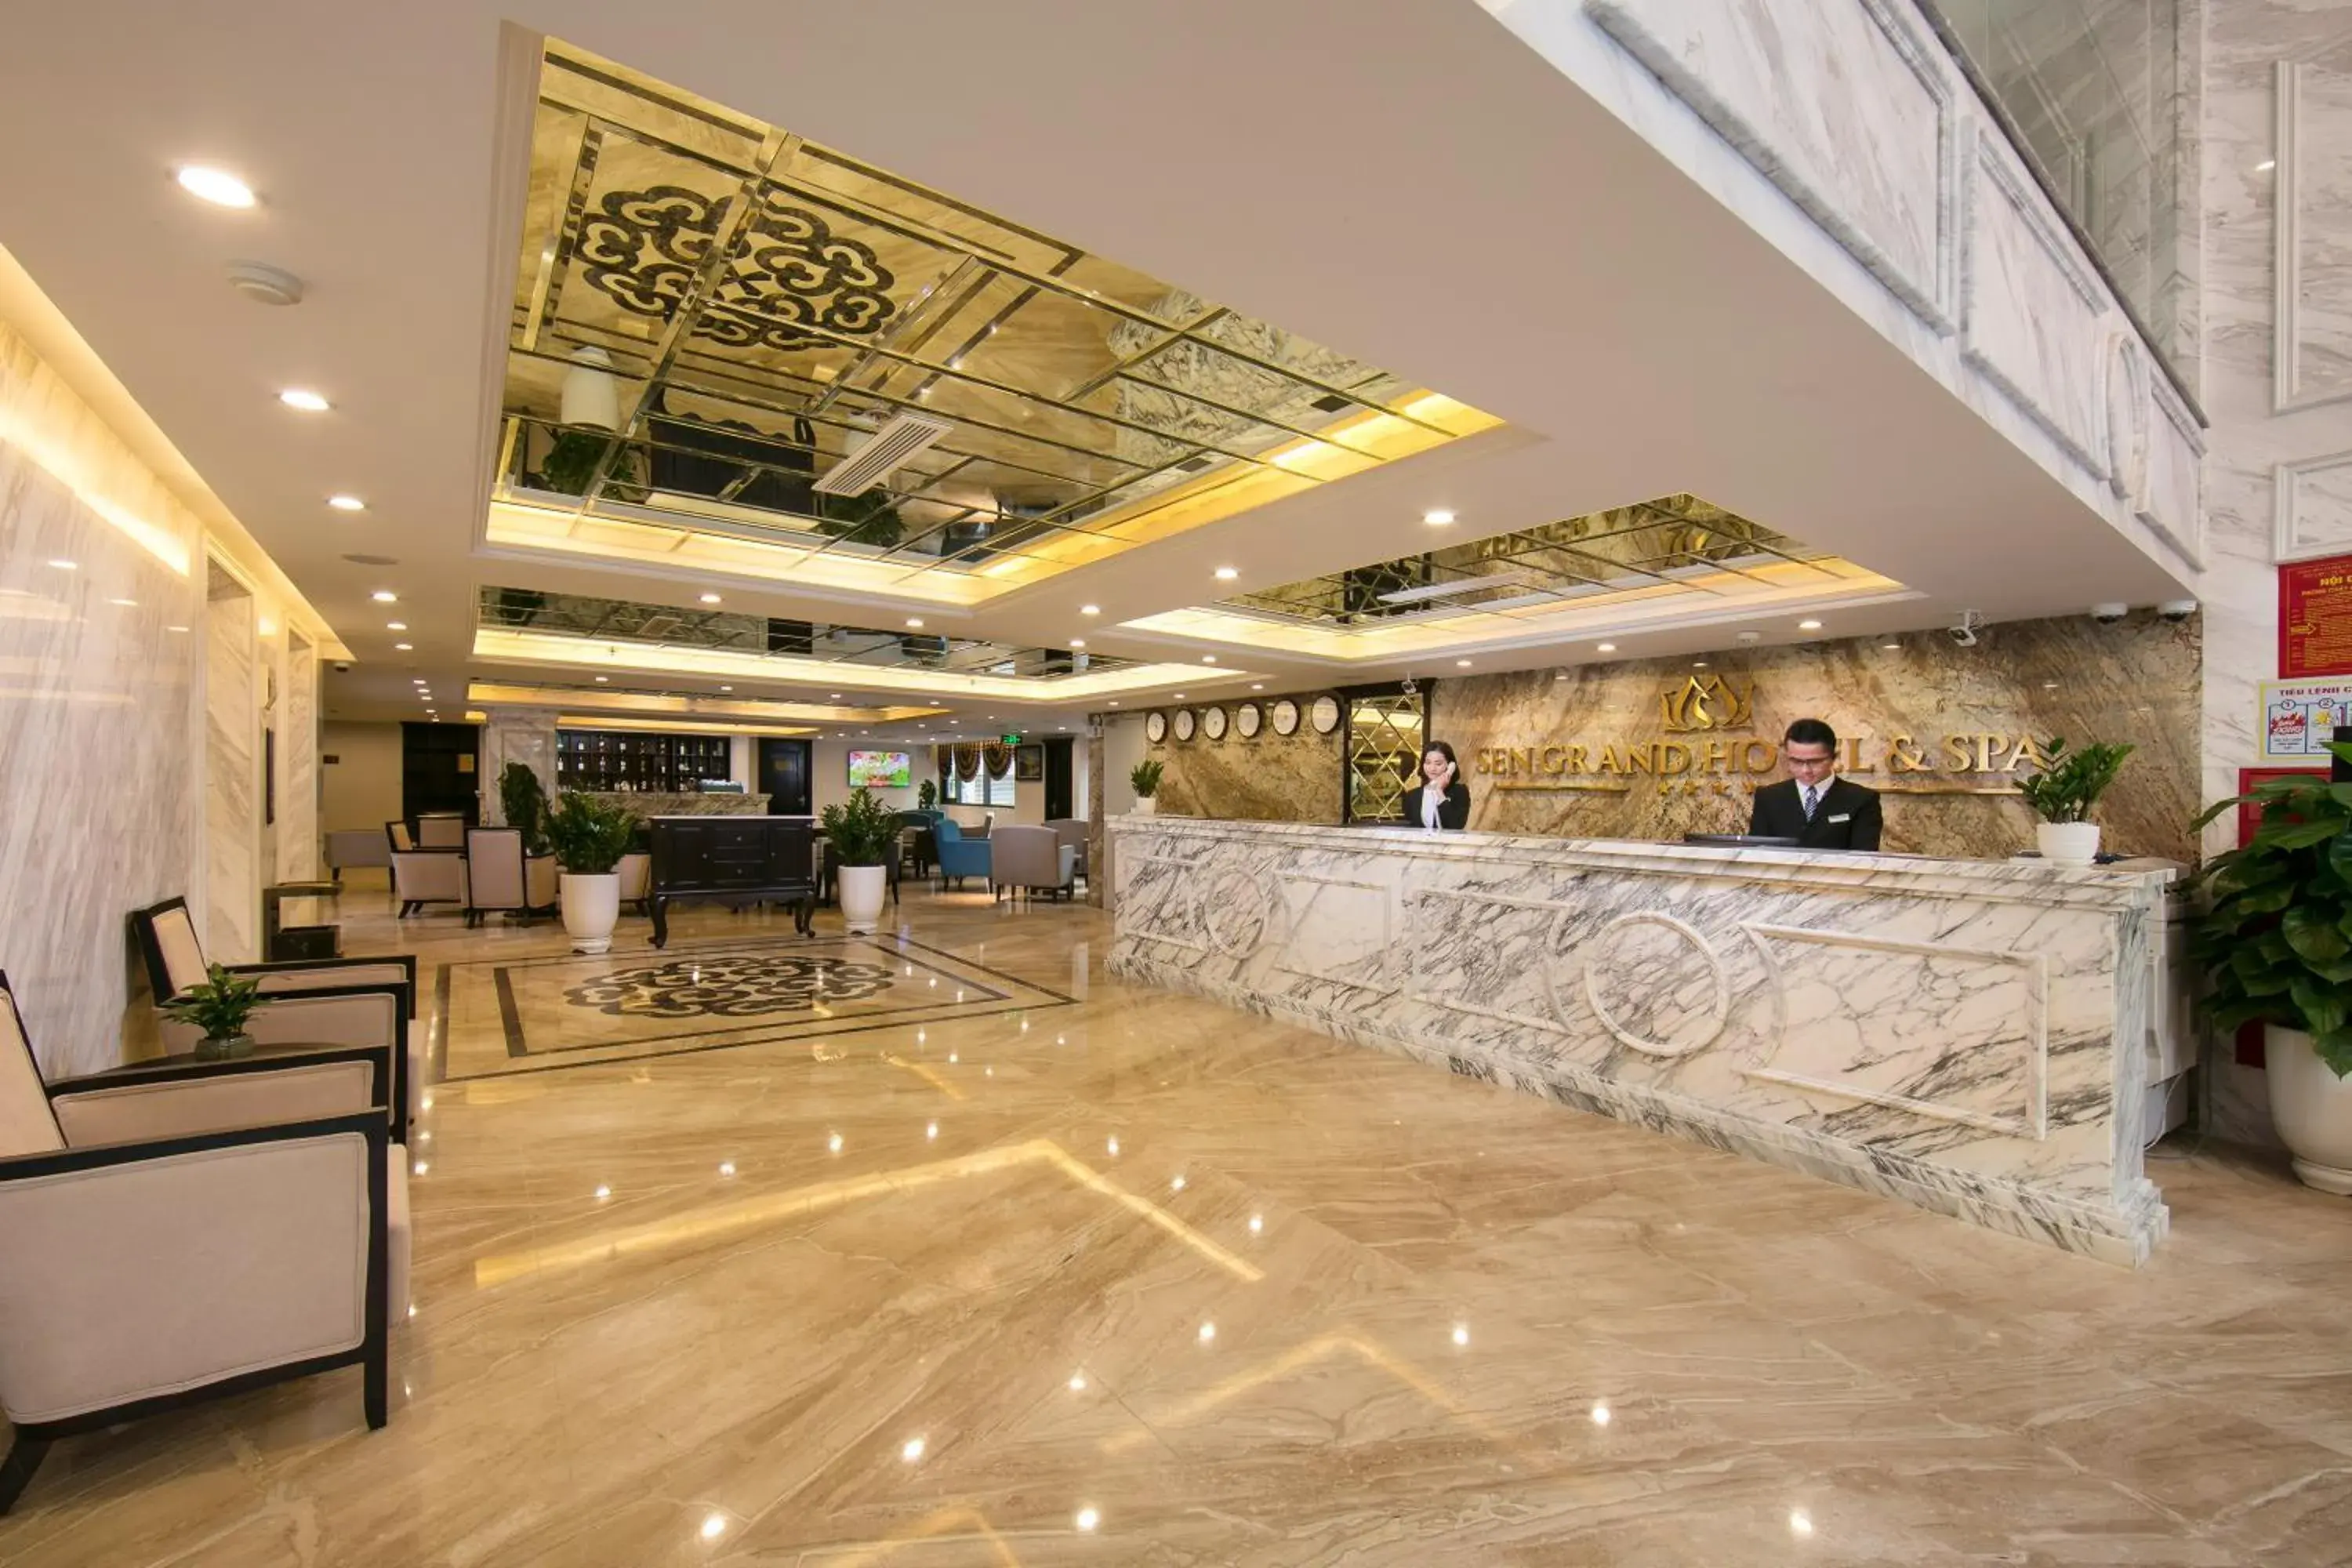 Staff, Lobby/Reception in Sen Grand Hotel & Spa managed by Sen Group